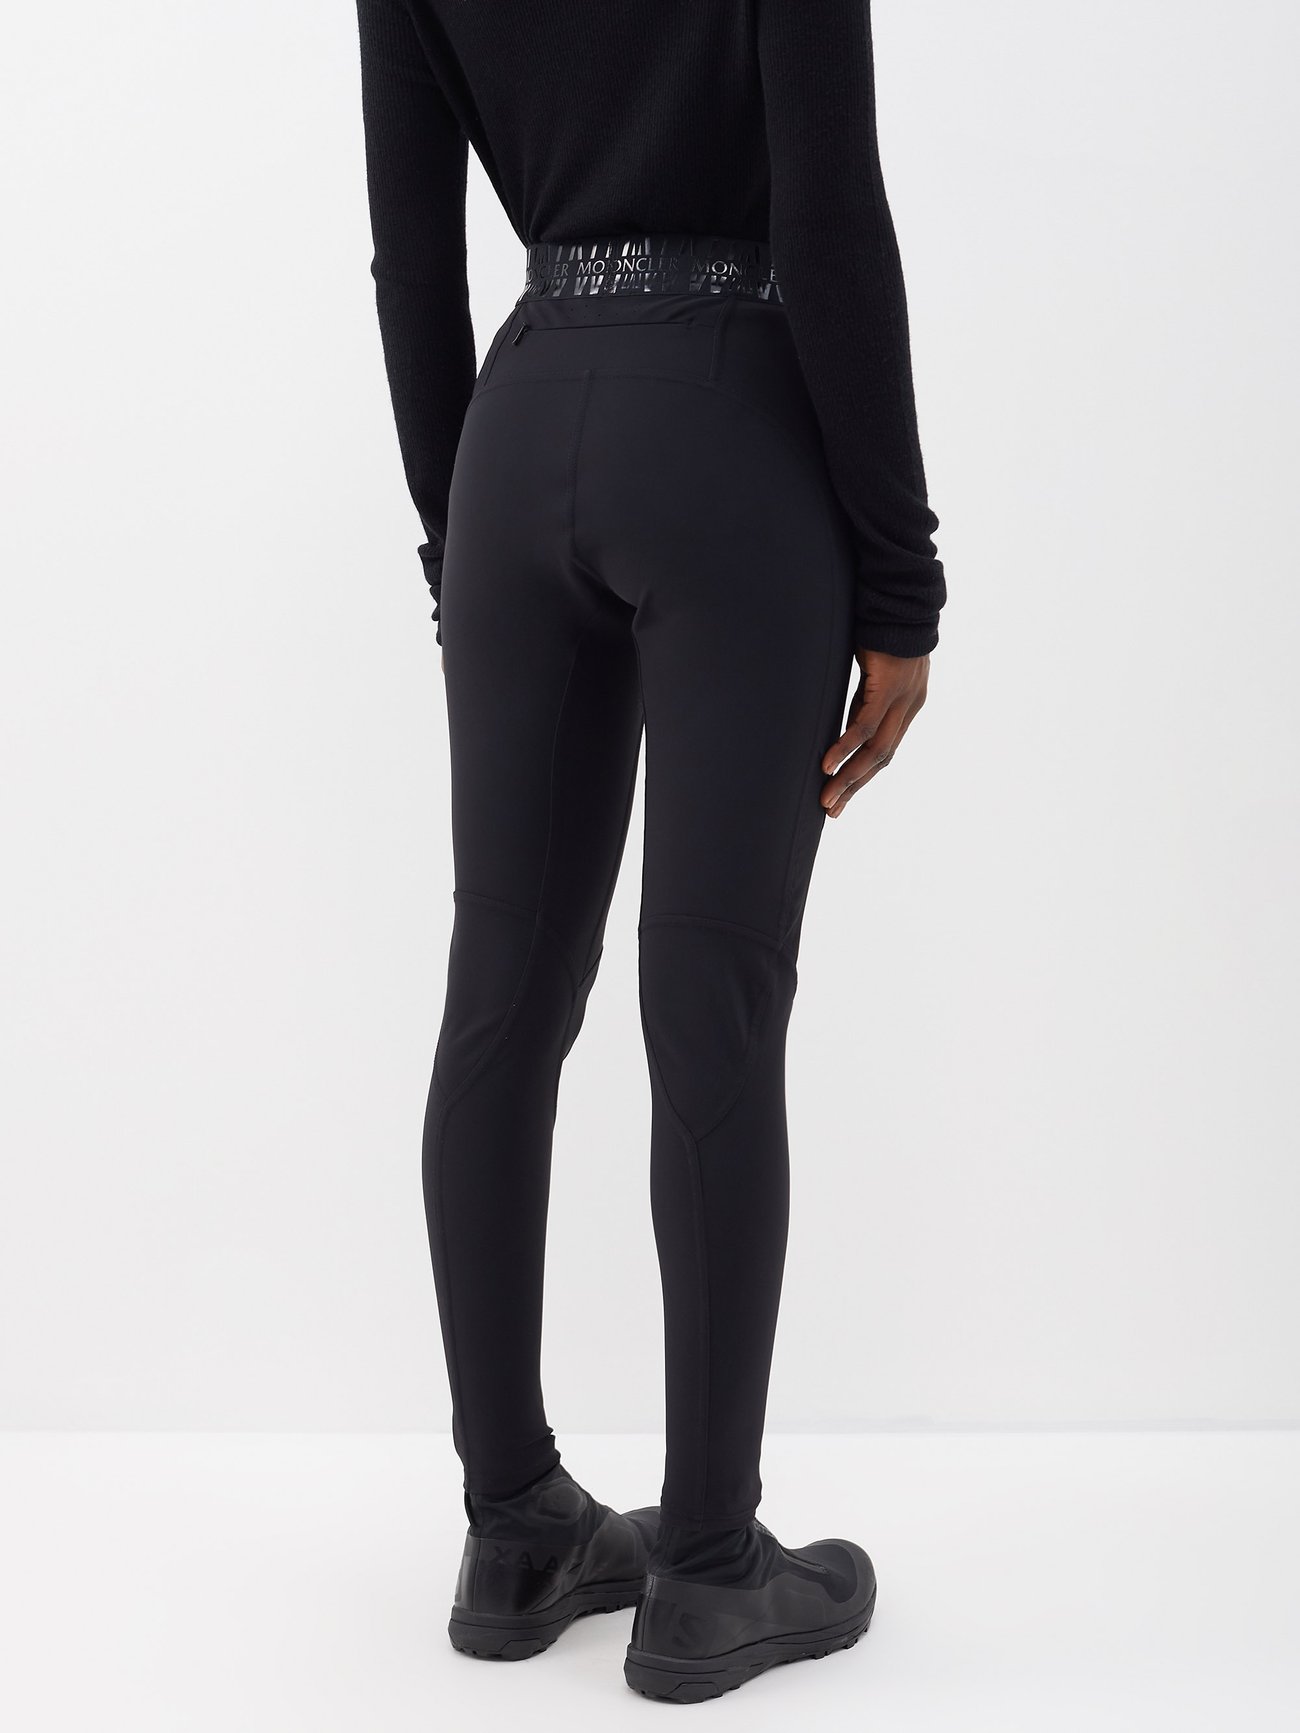 ZARA on X: Technical top and power stretch leggings